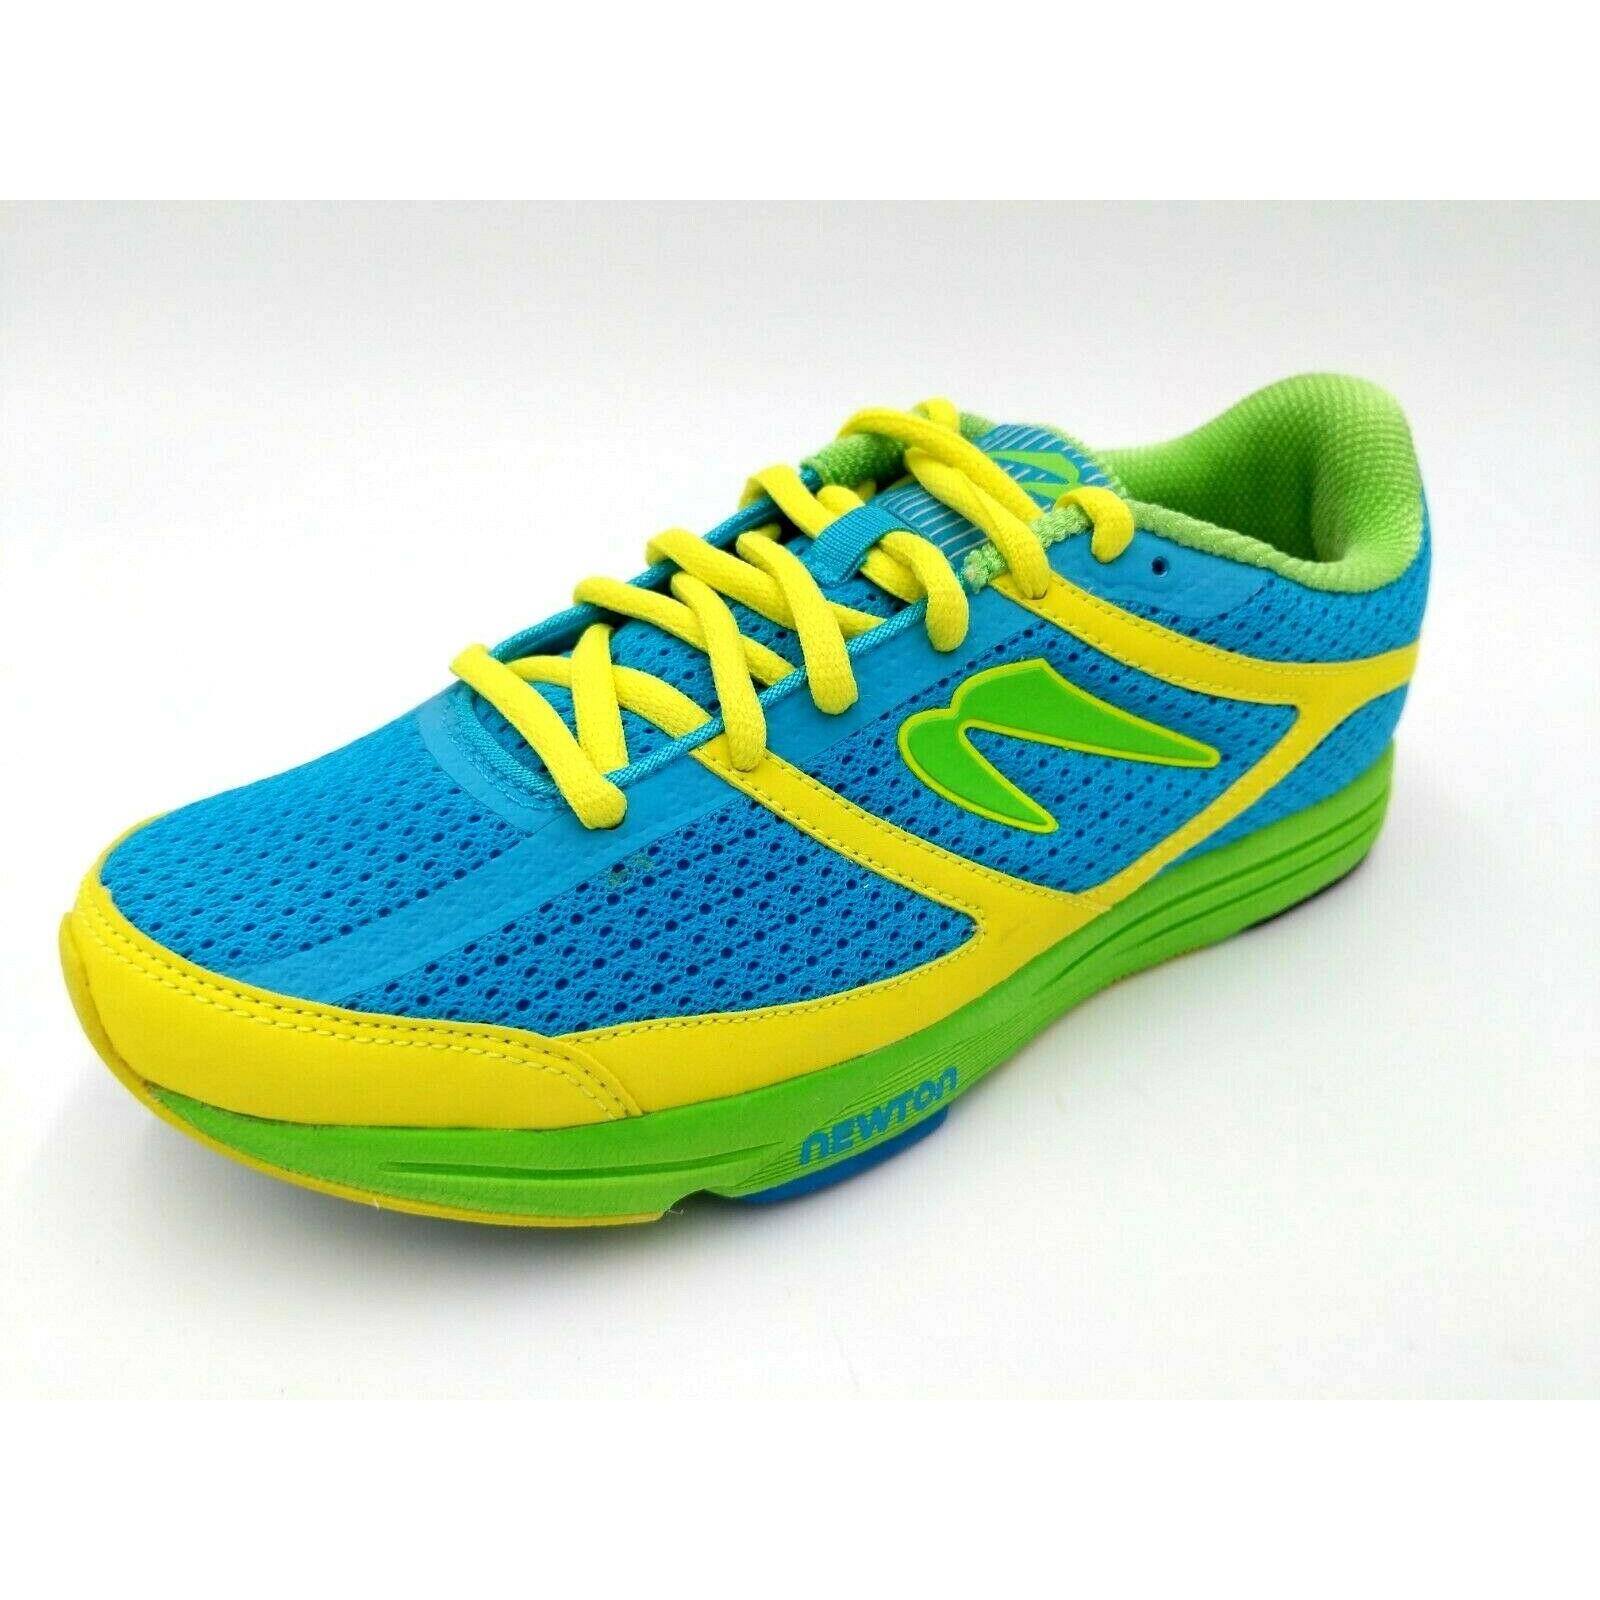 Newton Womens Energy NR Running Shoes W004213 Blue Yellow Green Size 6